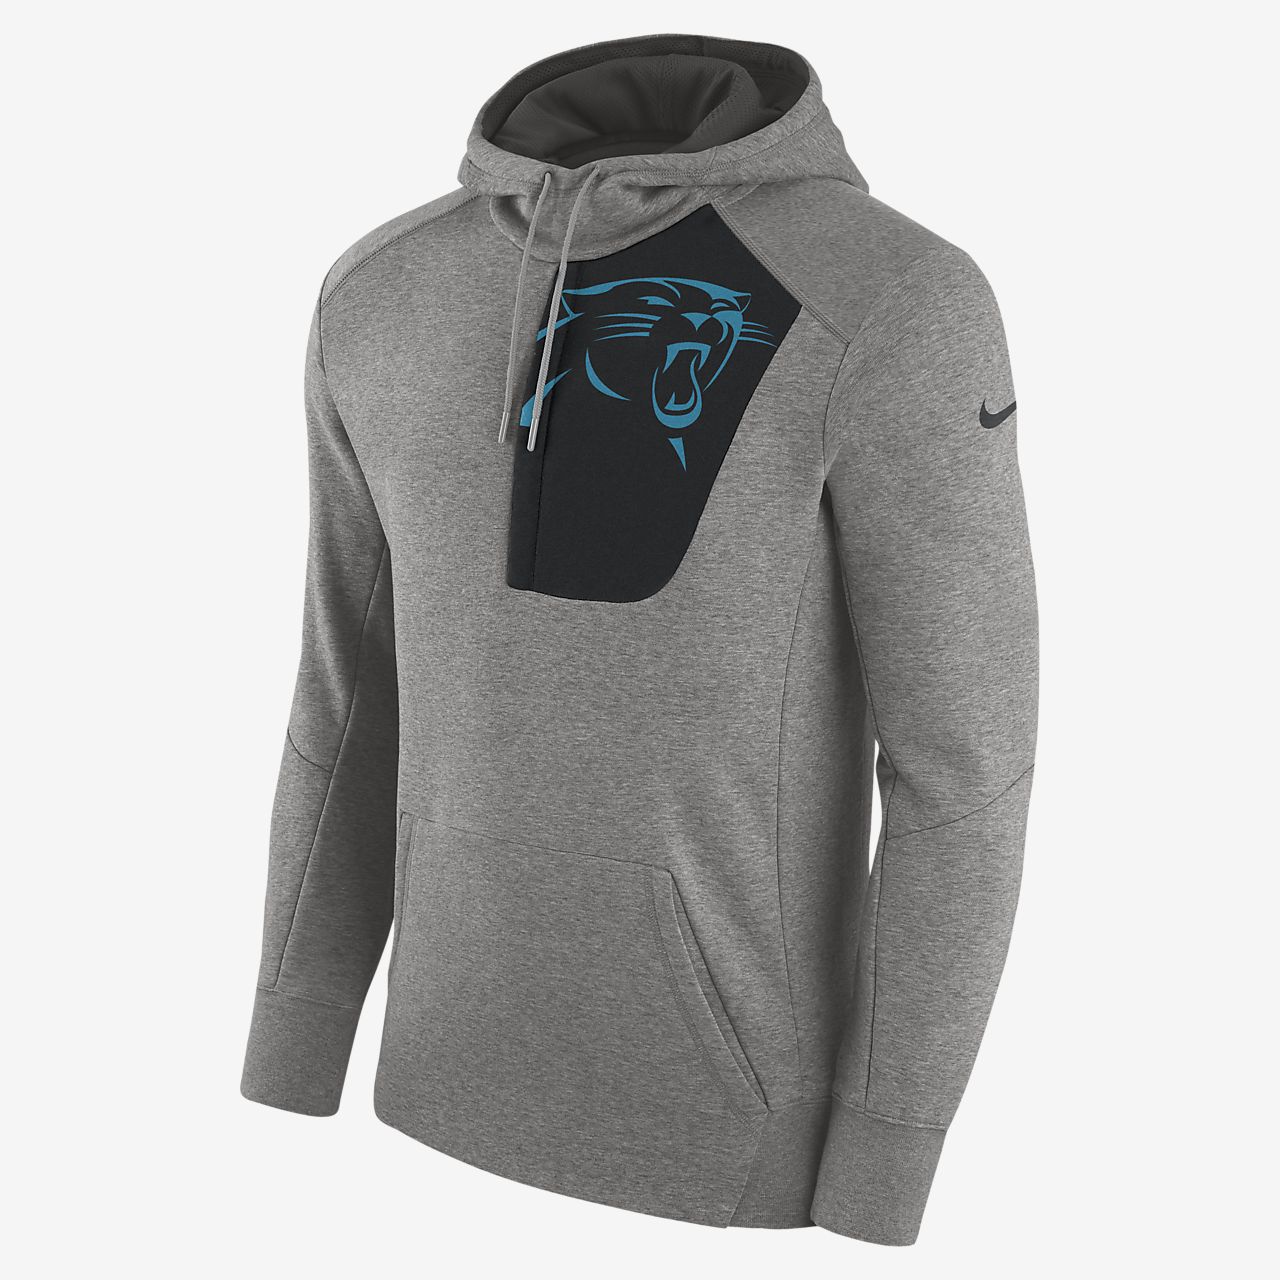 Sudadera con capucha para hombre Nike Fly Fleece (NFL Panthers 